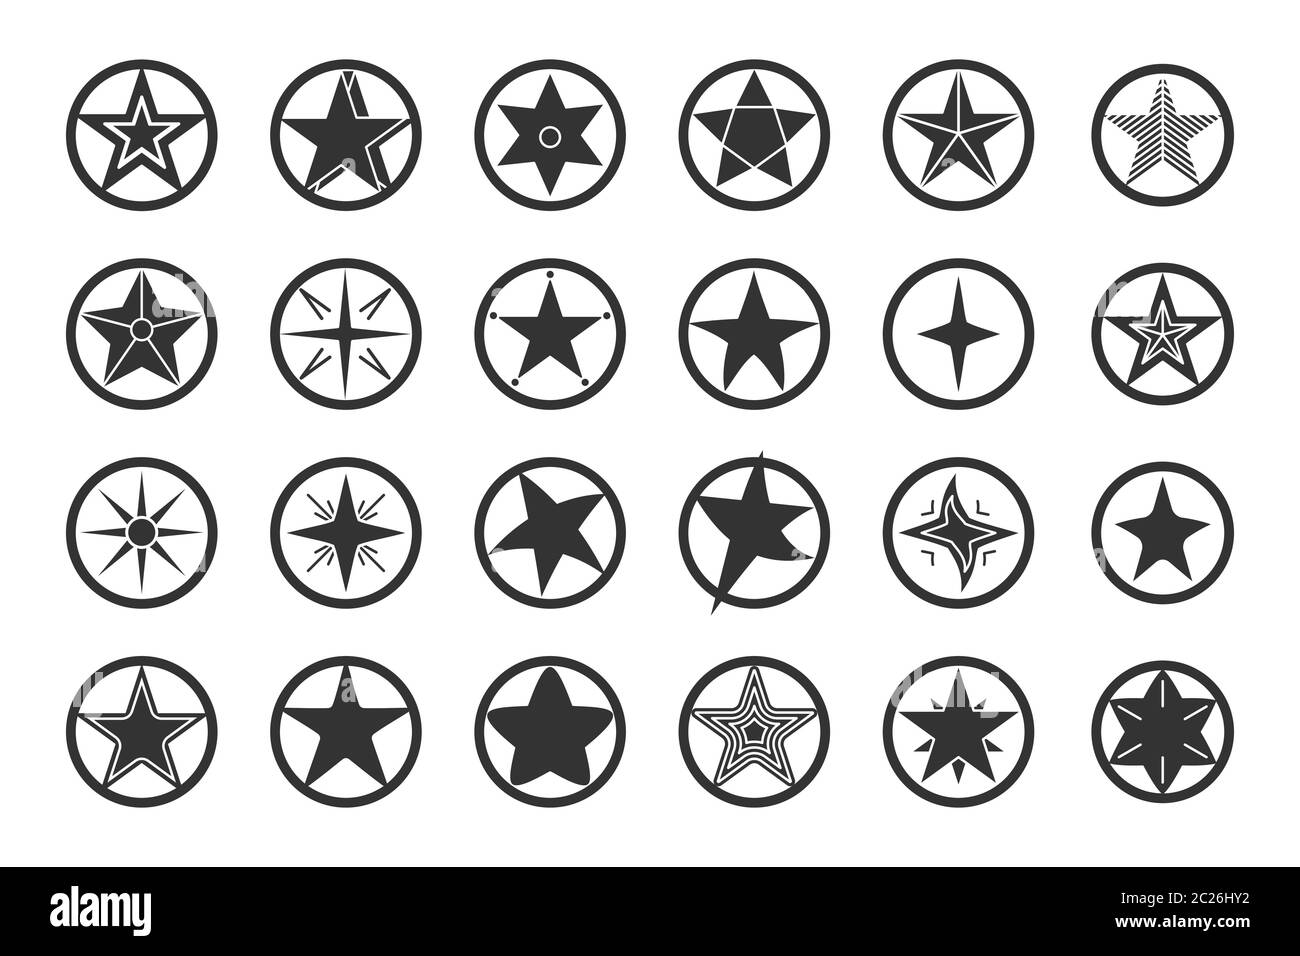 Star black in circle icon set. Abstract template different shape stars.  Empty starry sign design logo.